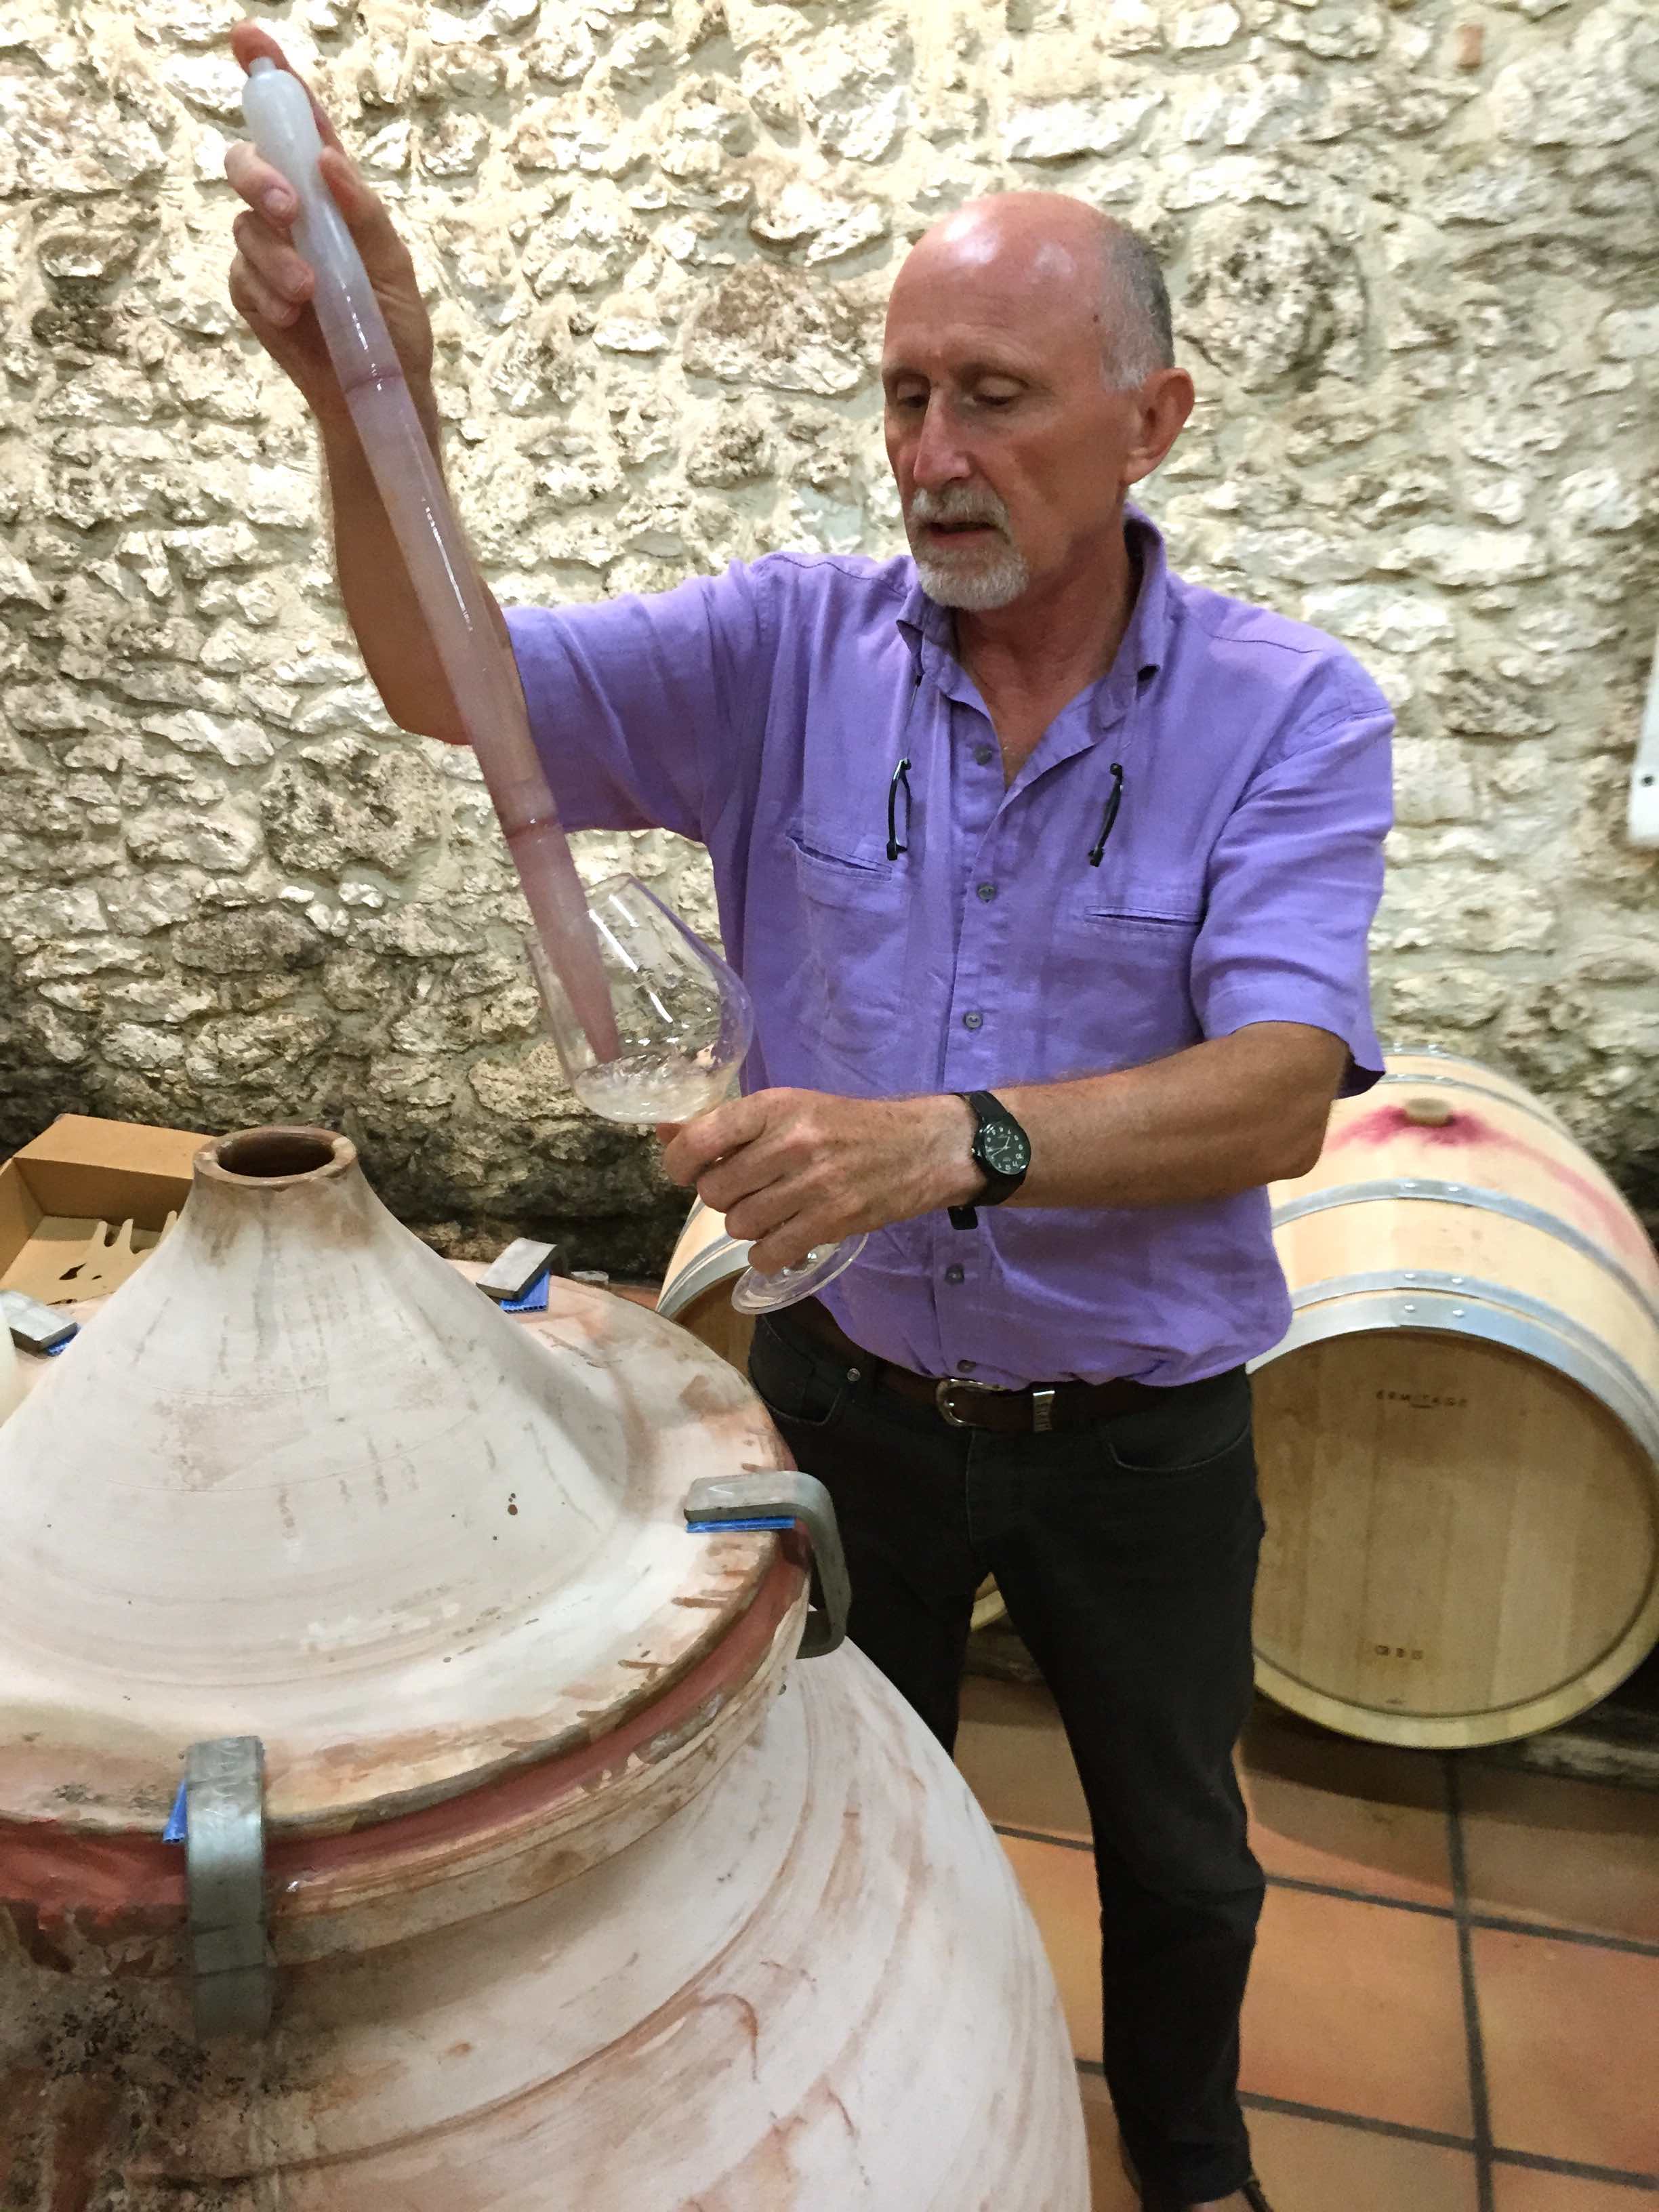 Beyond Bordeaux Satellites: From Bergerac to Gascony - Charles Neal -  Feature Articles - GuildSomm International